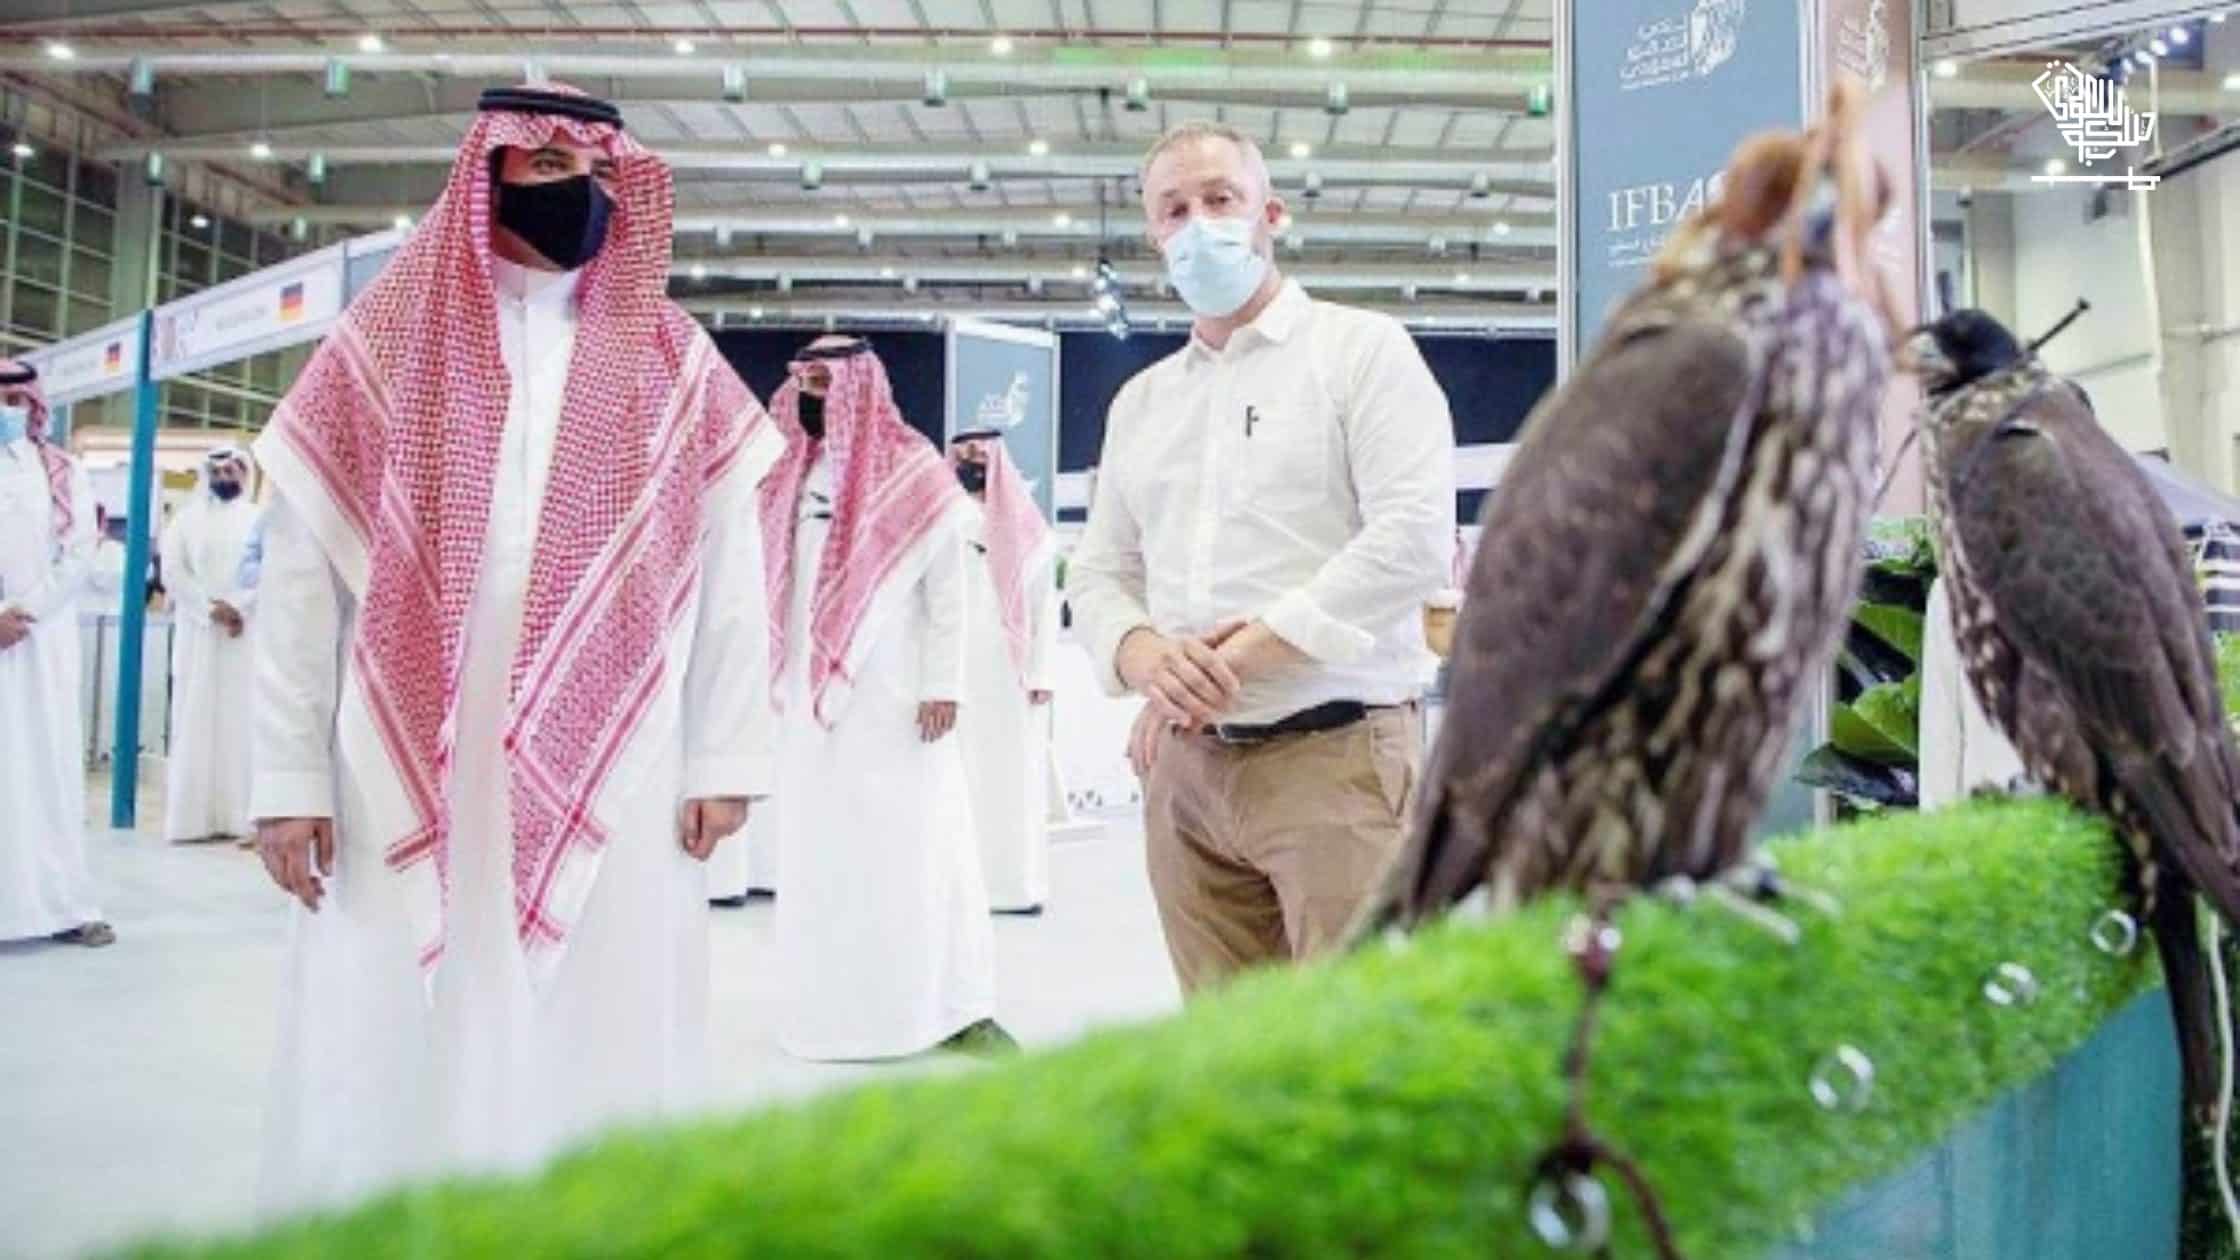 The Interior Minister meets falcon producers during the IFBA visit.